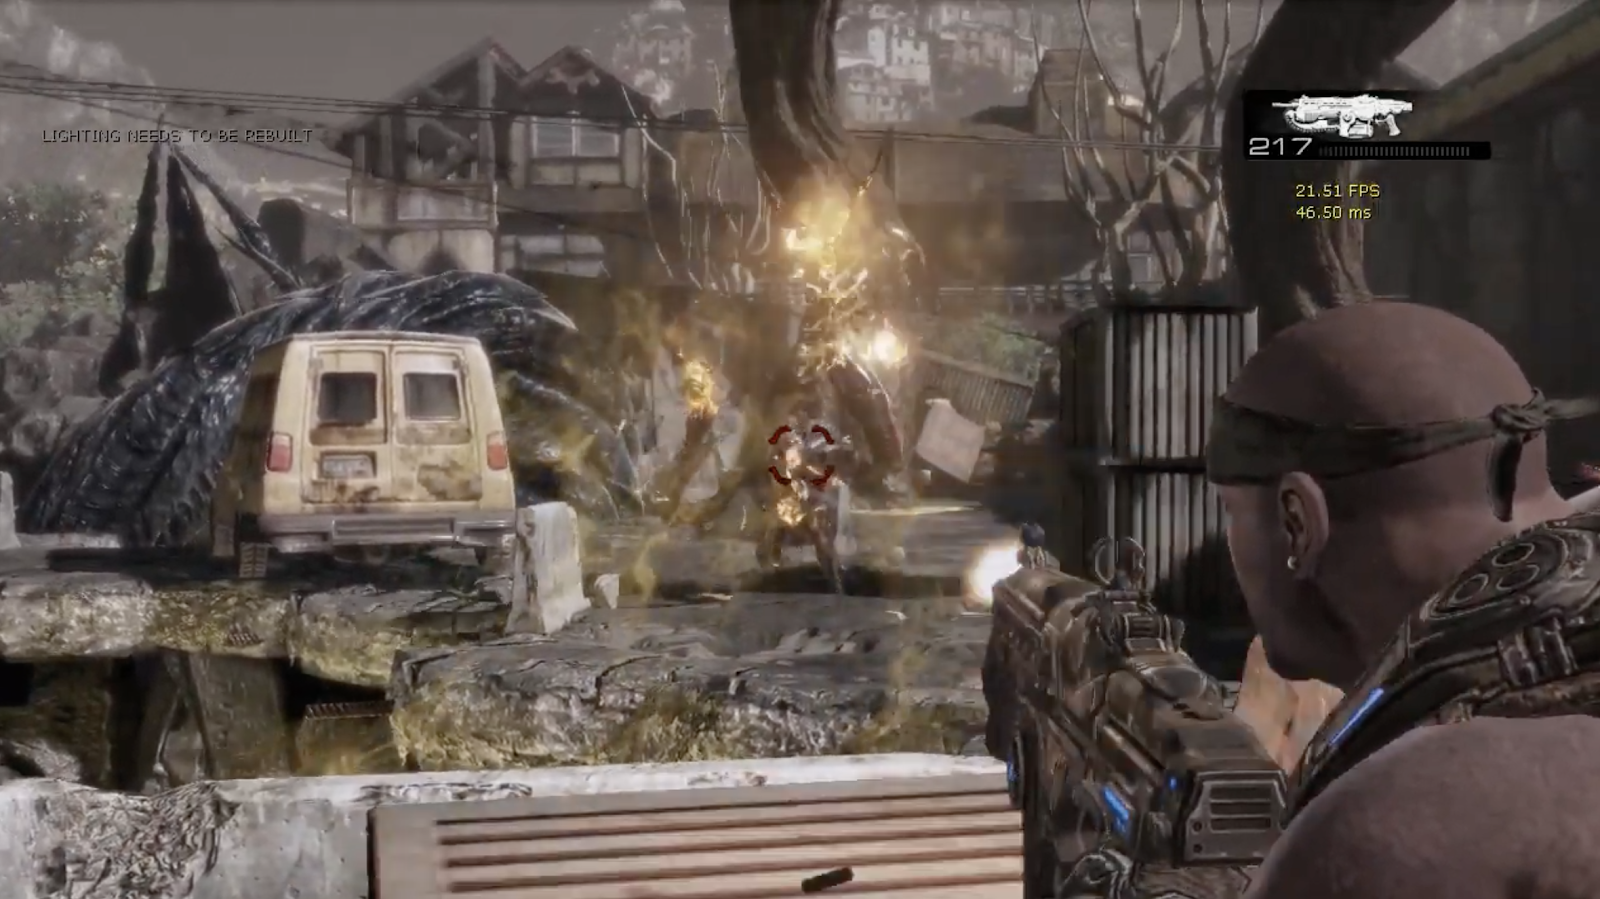 Mysterious Ps3 Gears Of War 3 Footage Appears Online